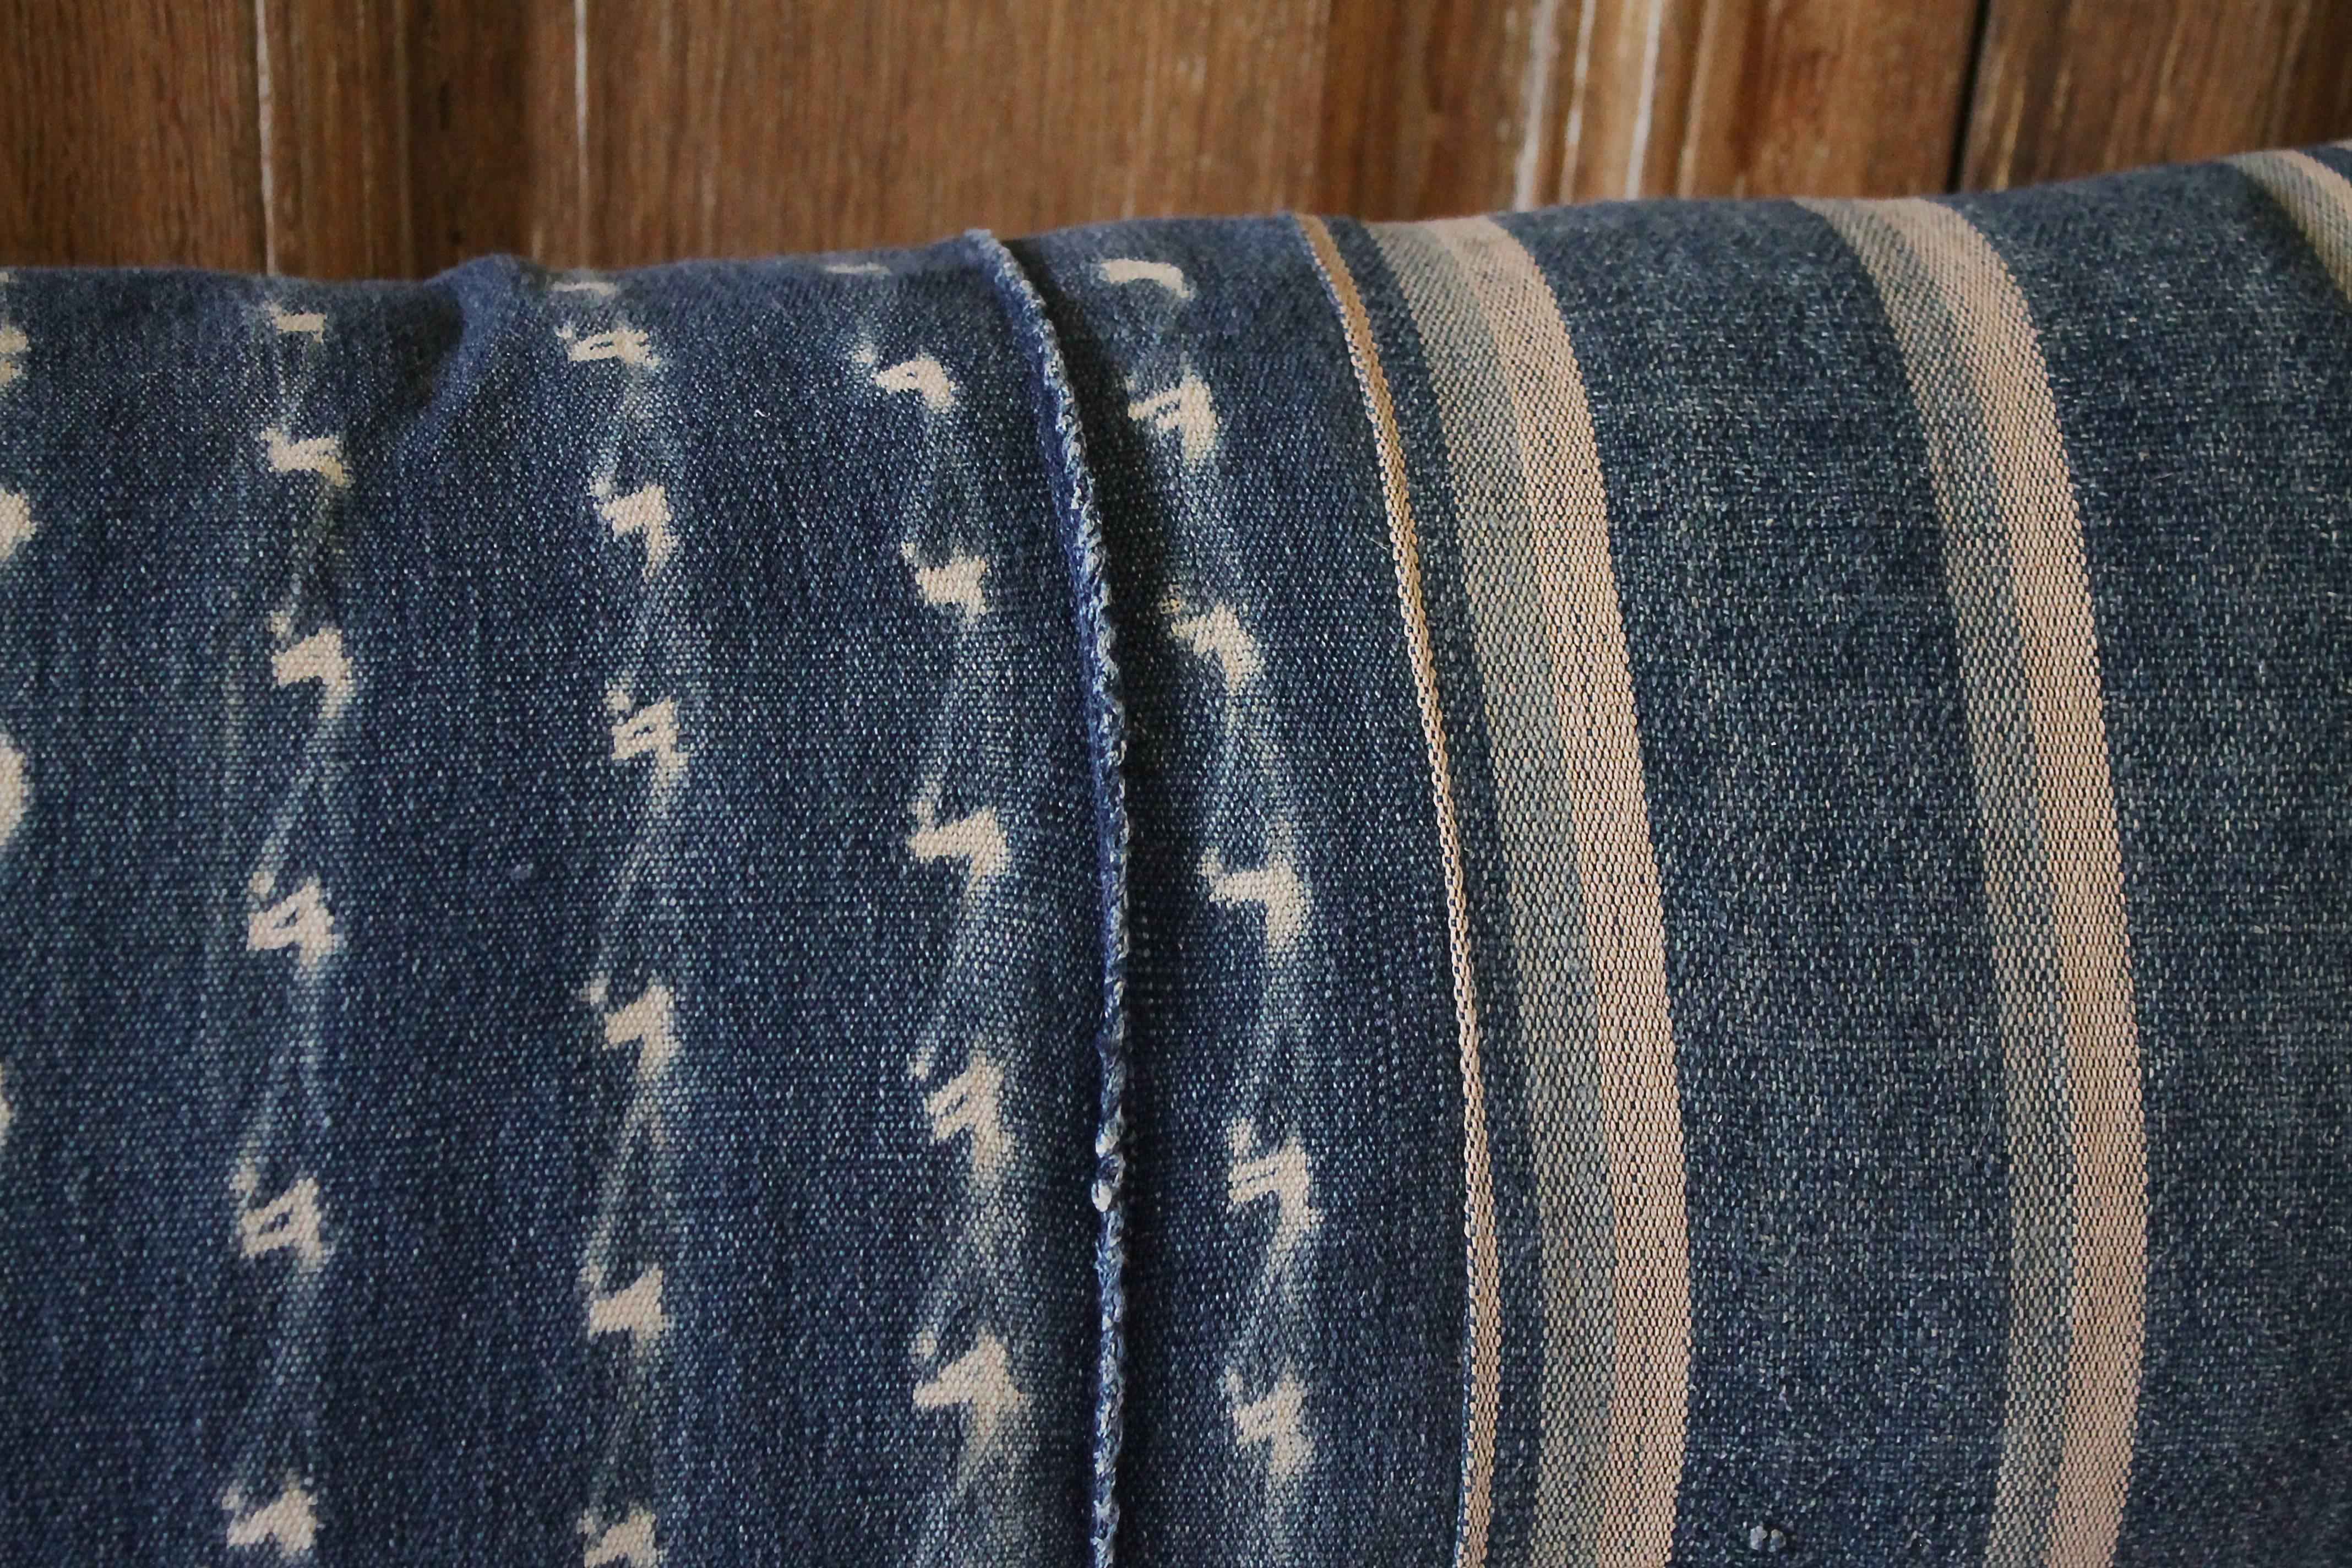 Custom pillow made from antique textiles by Full Bloom Cottage. Antique indigo blue batik lumbar pillow with down insert and hidden zipper closure. Back side of the pillow is finished in an antique French linen in natural. Measures 13 x 30.